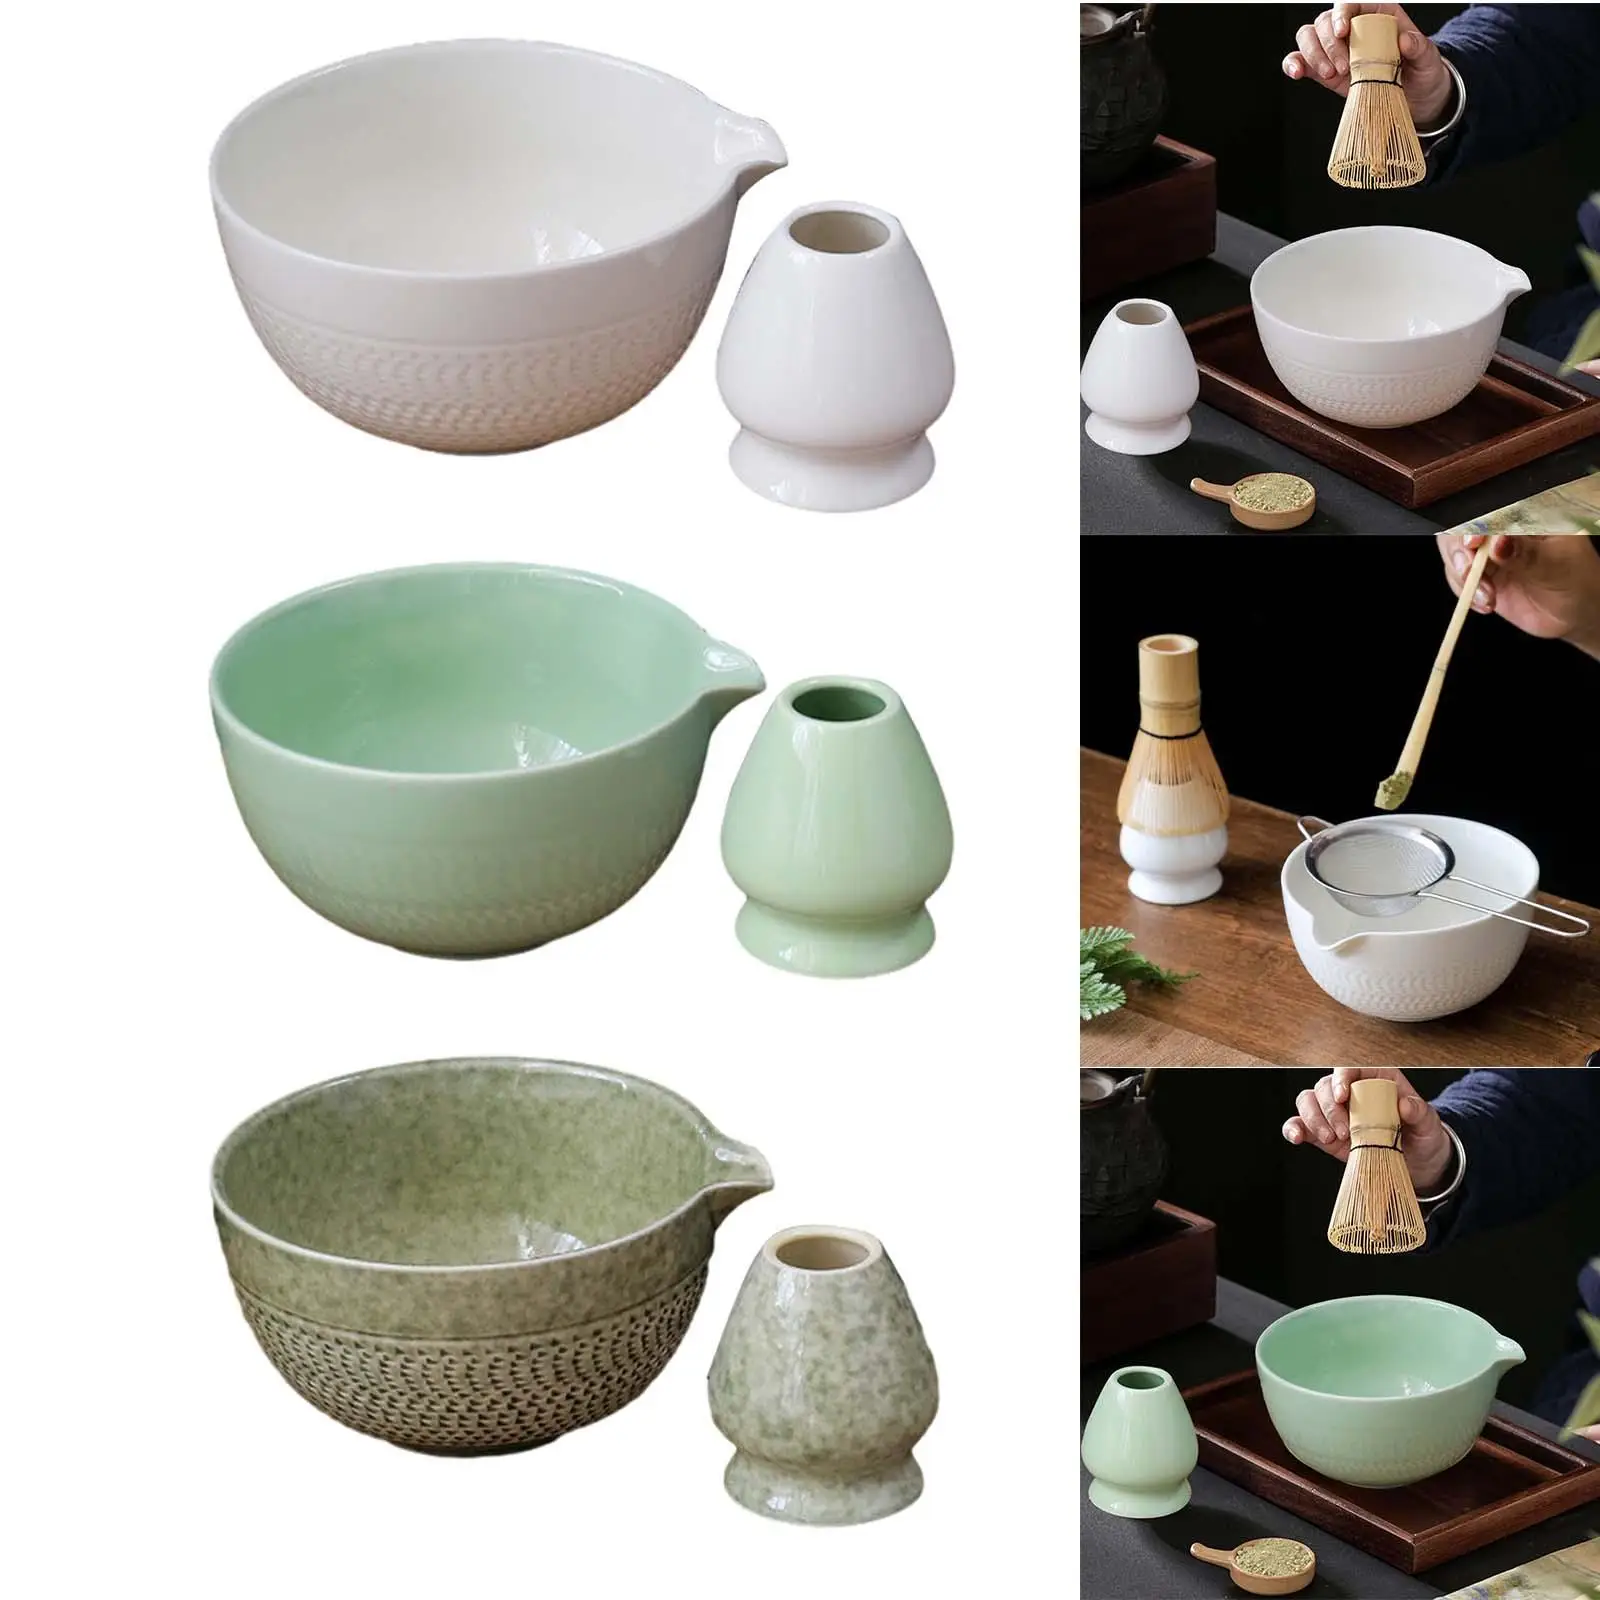 2Pcs Traditional Matcha Bowl with Whisk Holder Handmade Matcha Ceremony for Traditional Ceremonial Home Table Office Bedroom